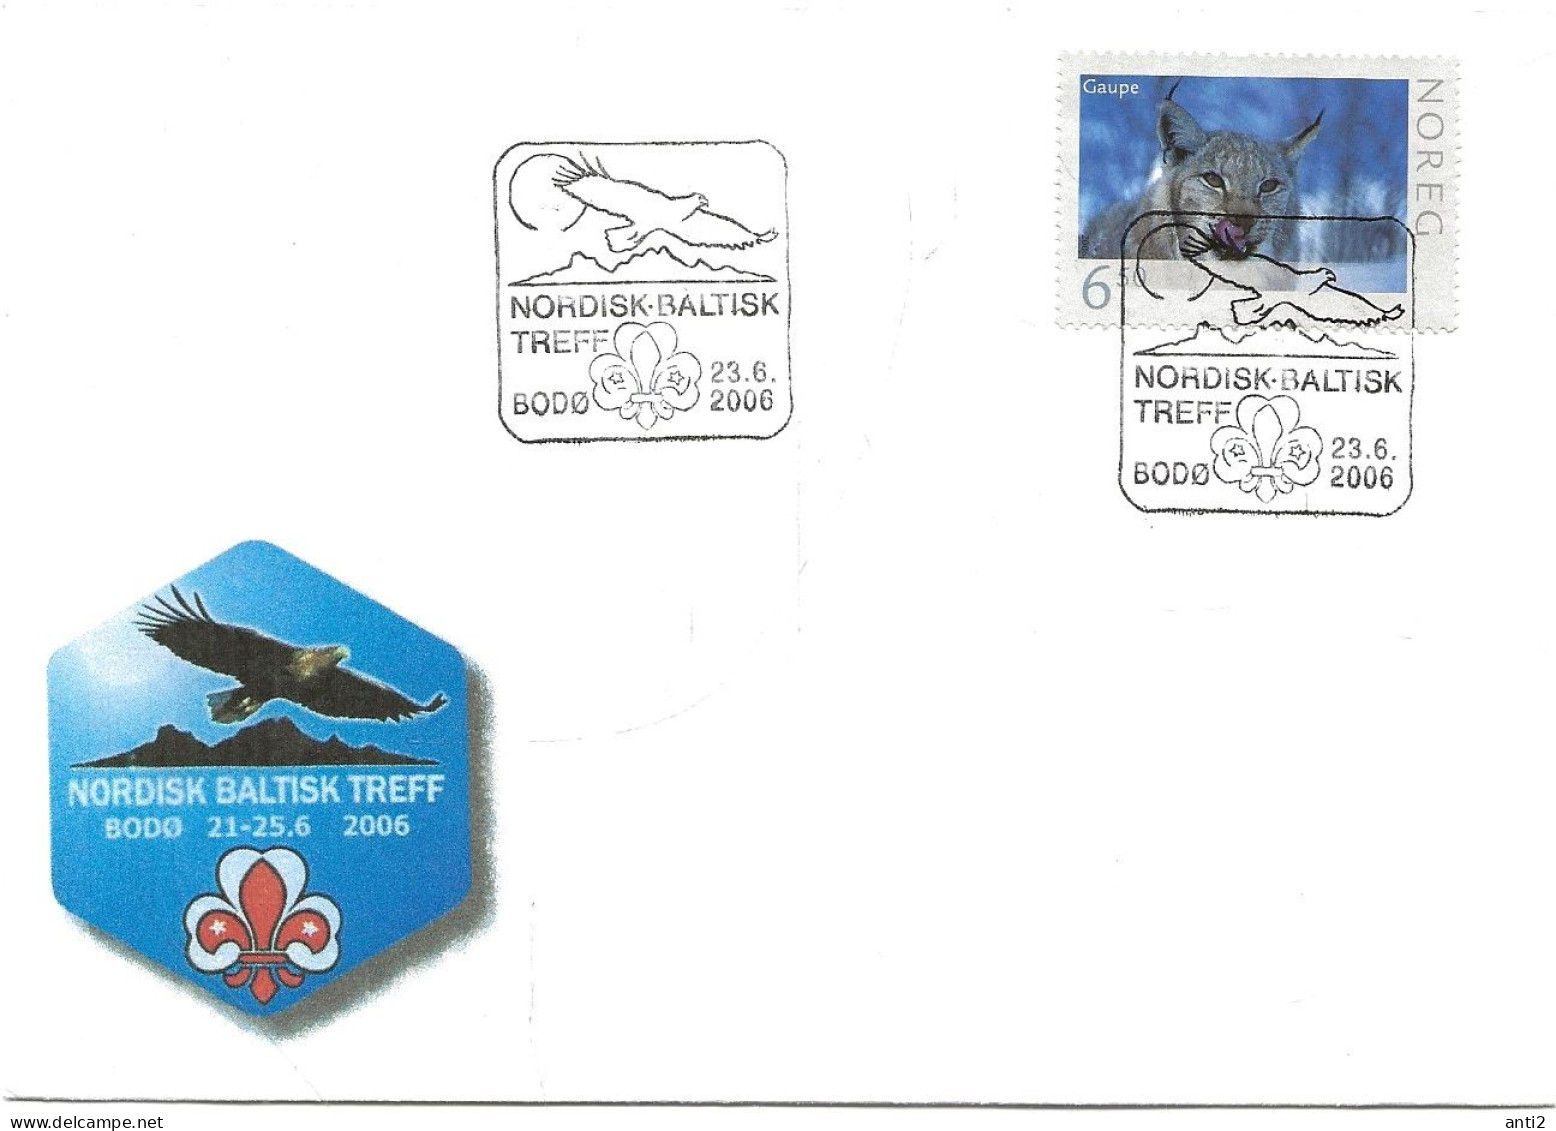 Norway  1997  NKS Nordic Baltic Meeting- Mi 1573 Special Cancellation 23.6.2006  Bodø - Covers & Documents